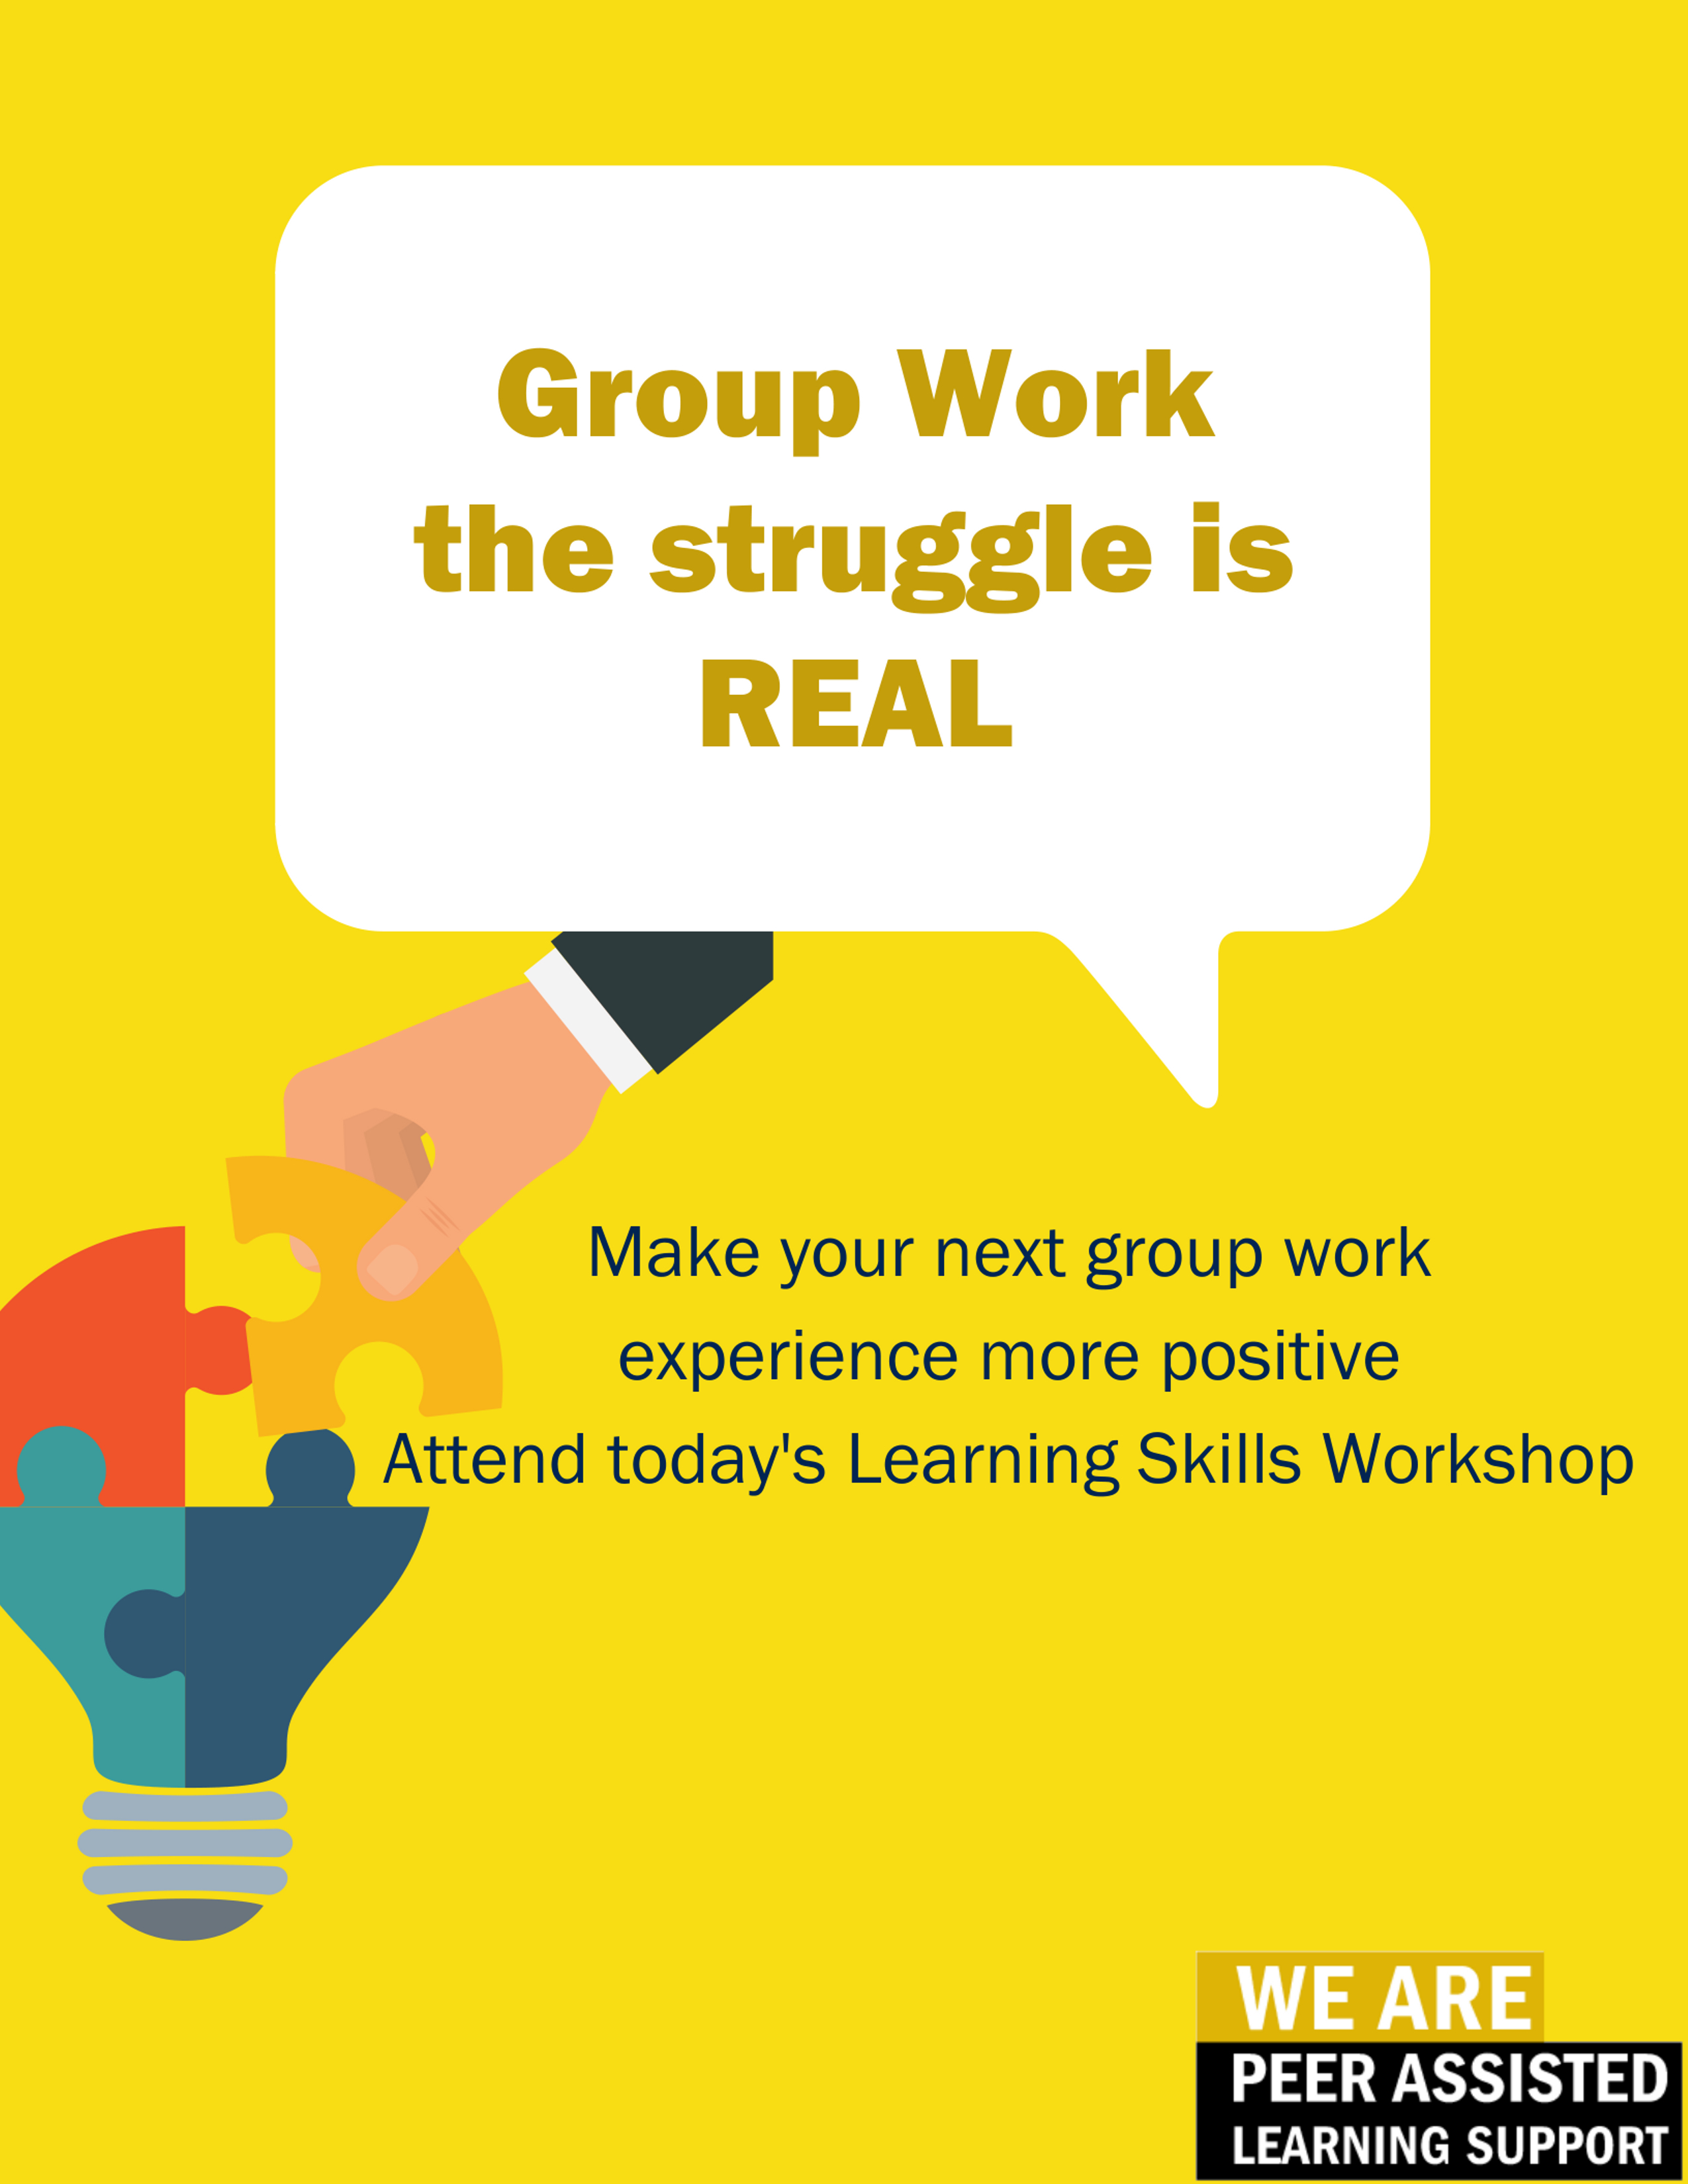 Hate group work? Discover ways to make your next group work a more positive experience.